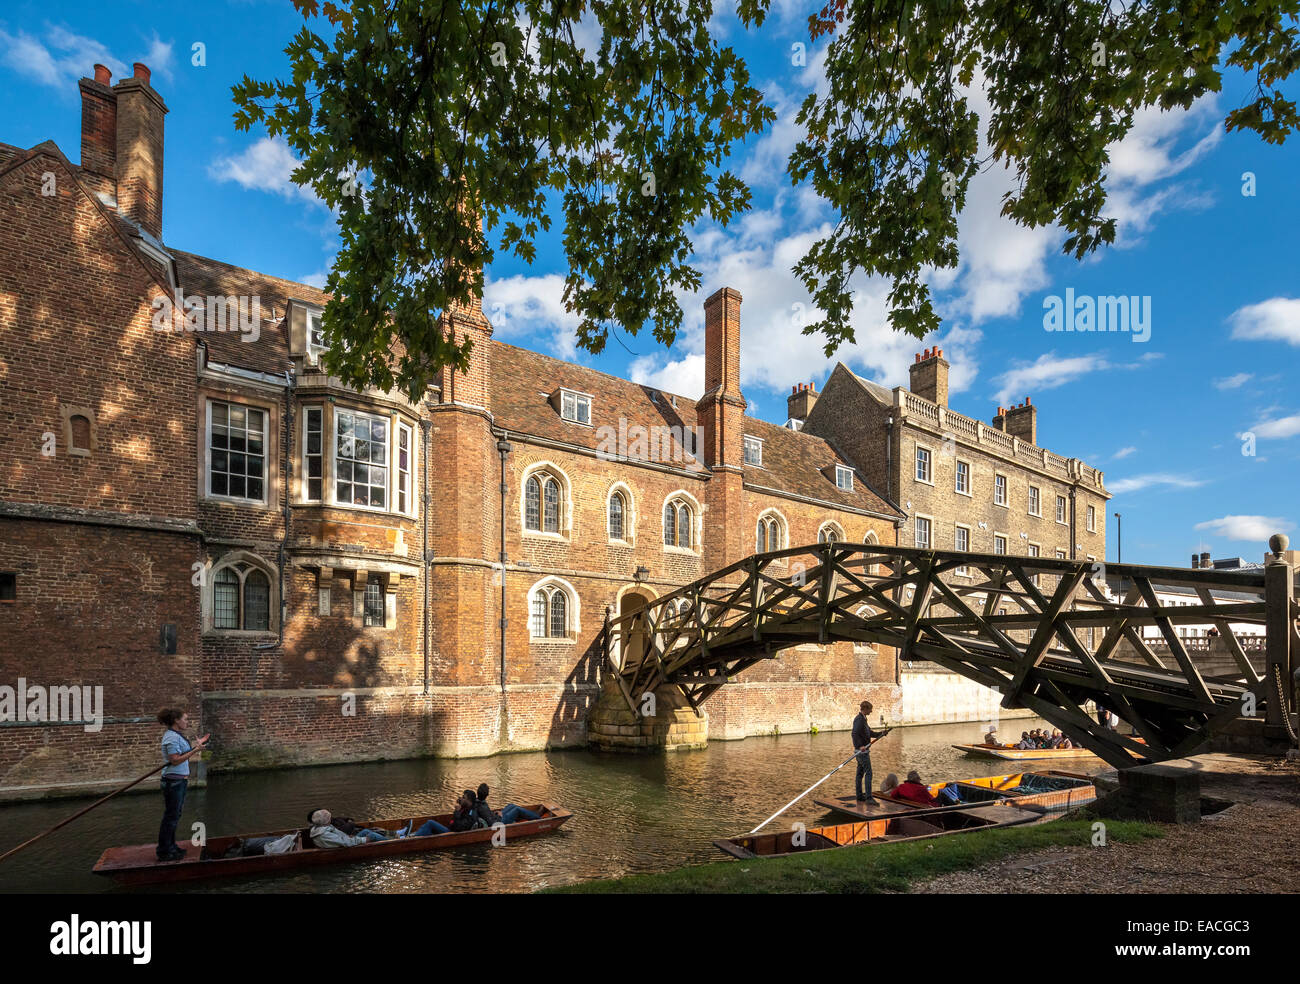 Cambridge Mathematical Bridge on the River Cam at Queens' College, with tourists and students punting, polling in punts. Stock Photo